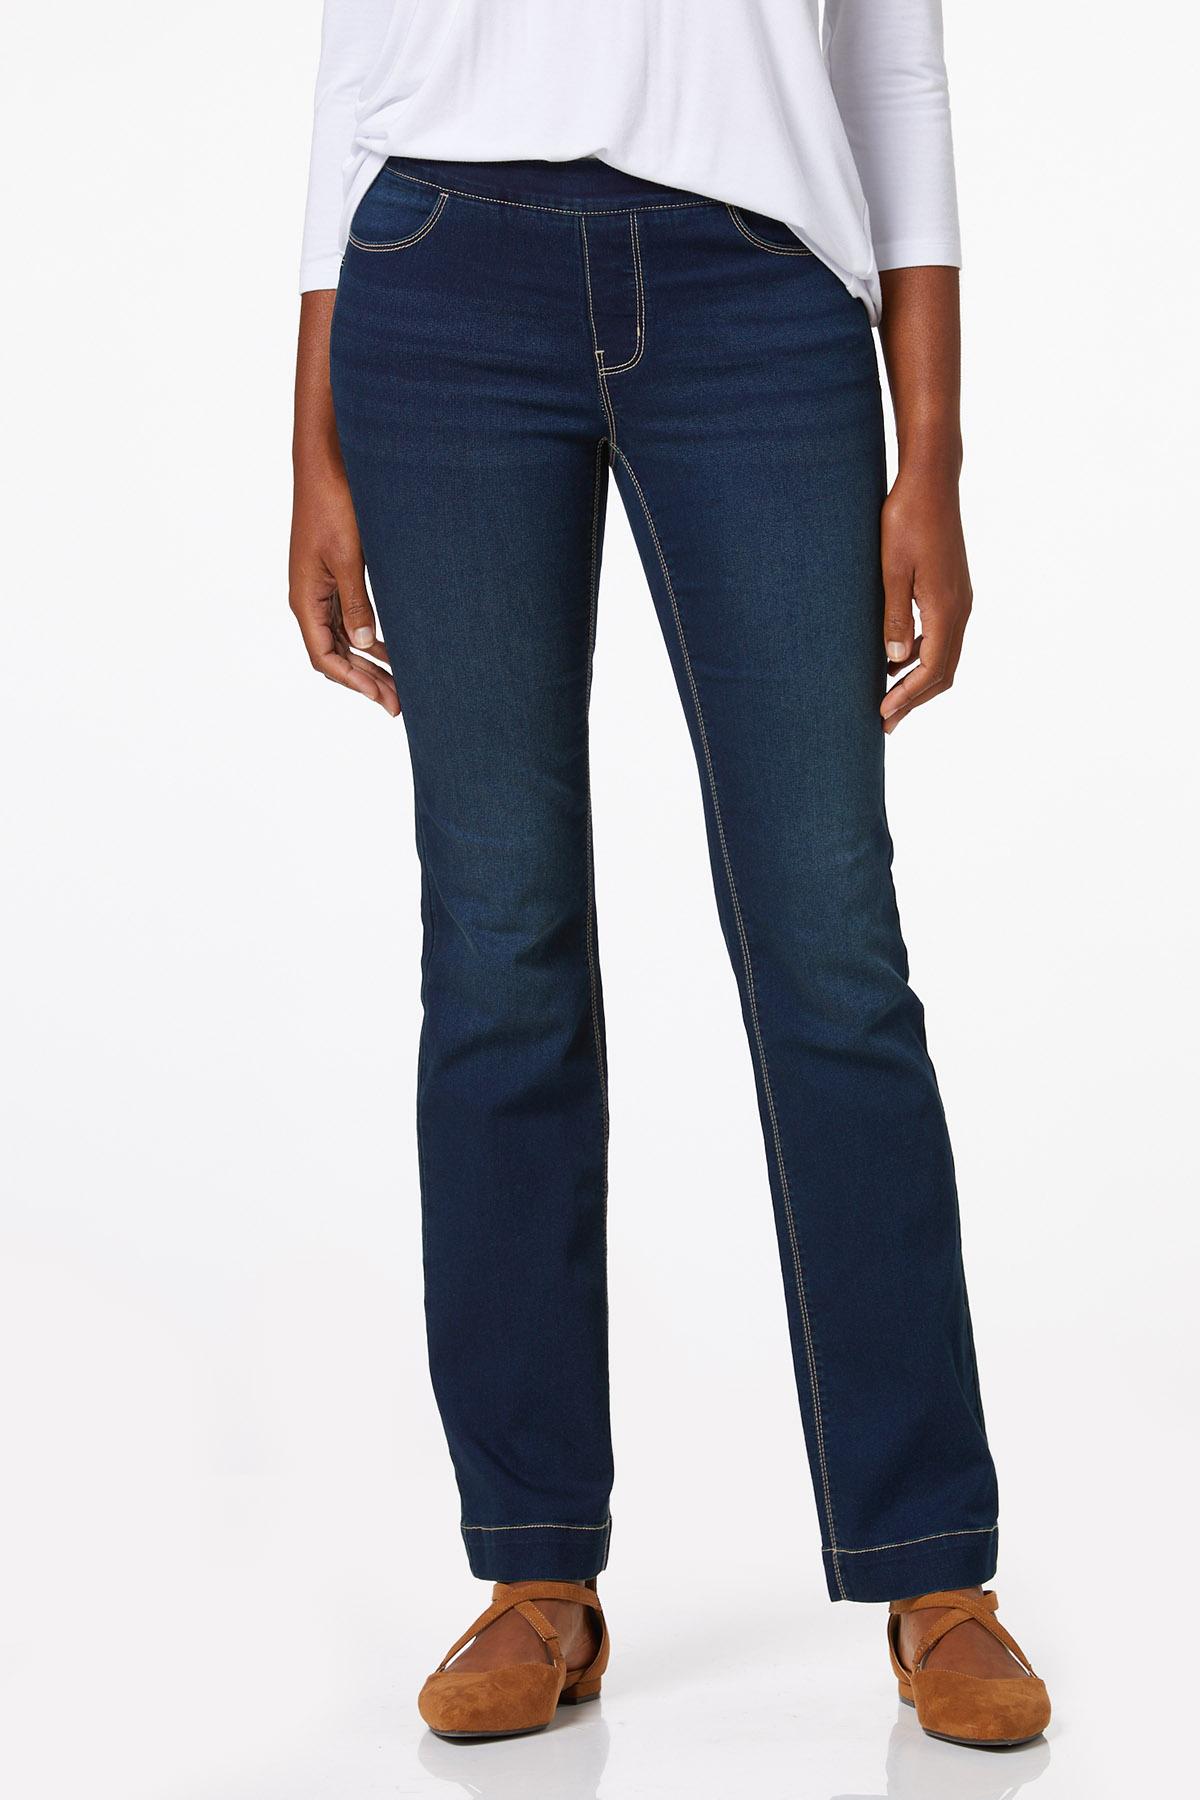 Cato Fashions  Cato Petite Pull-On Jeans